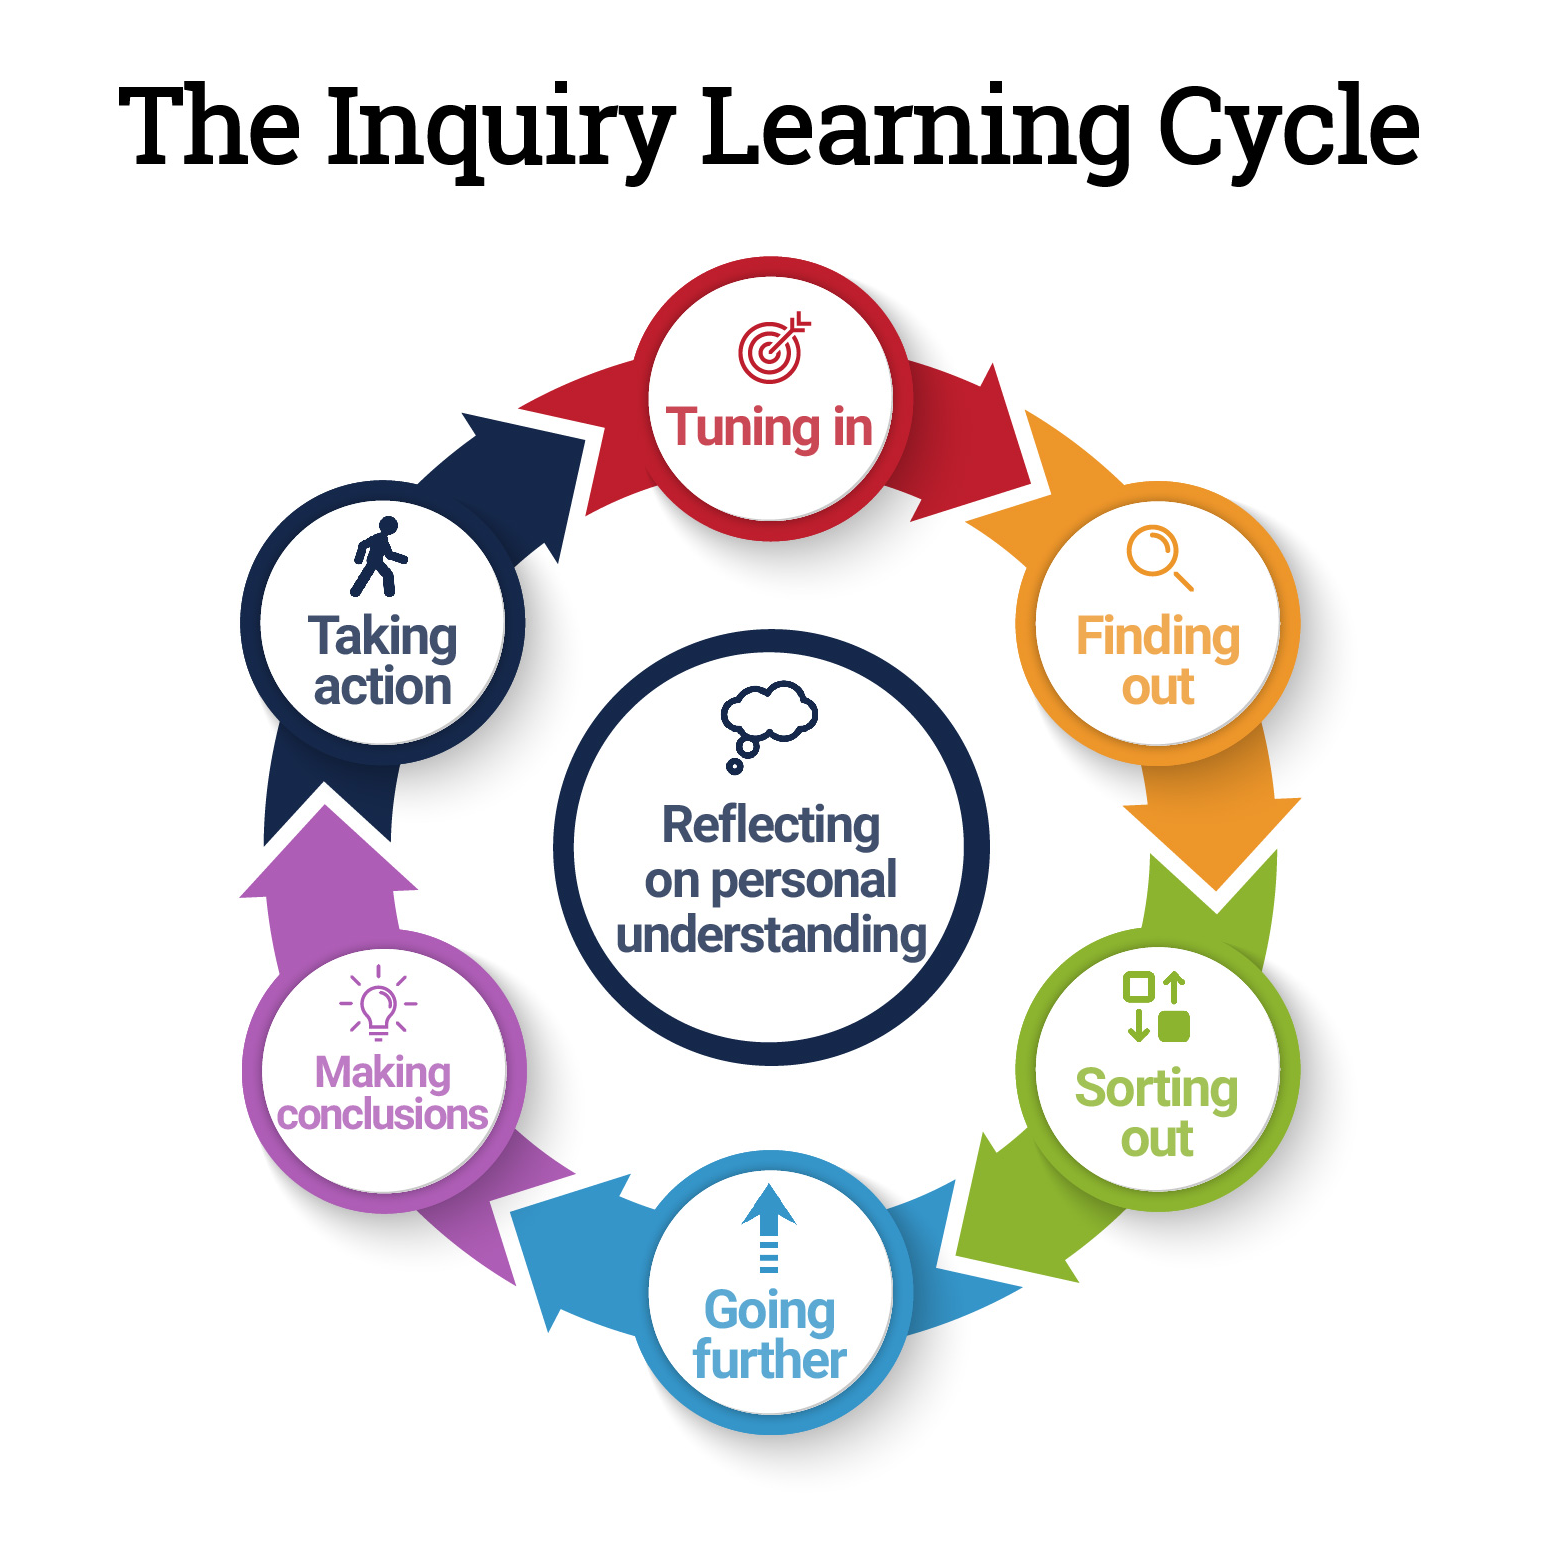 The Inquiry Learning Cycle